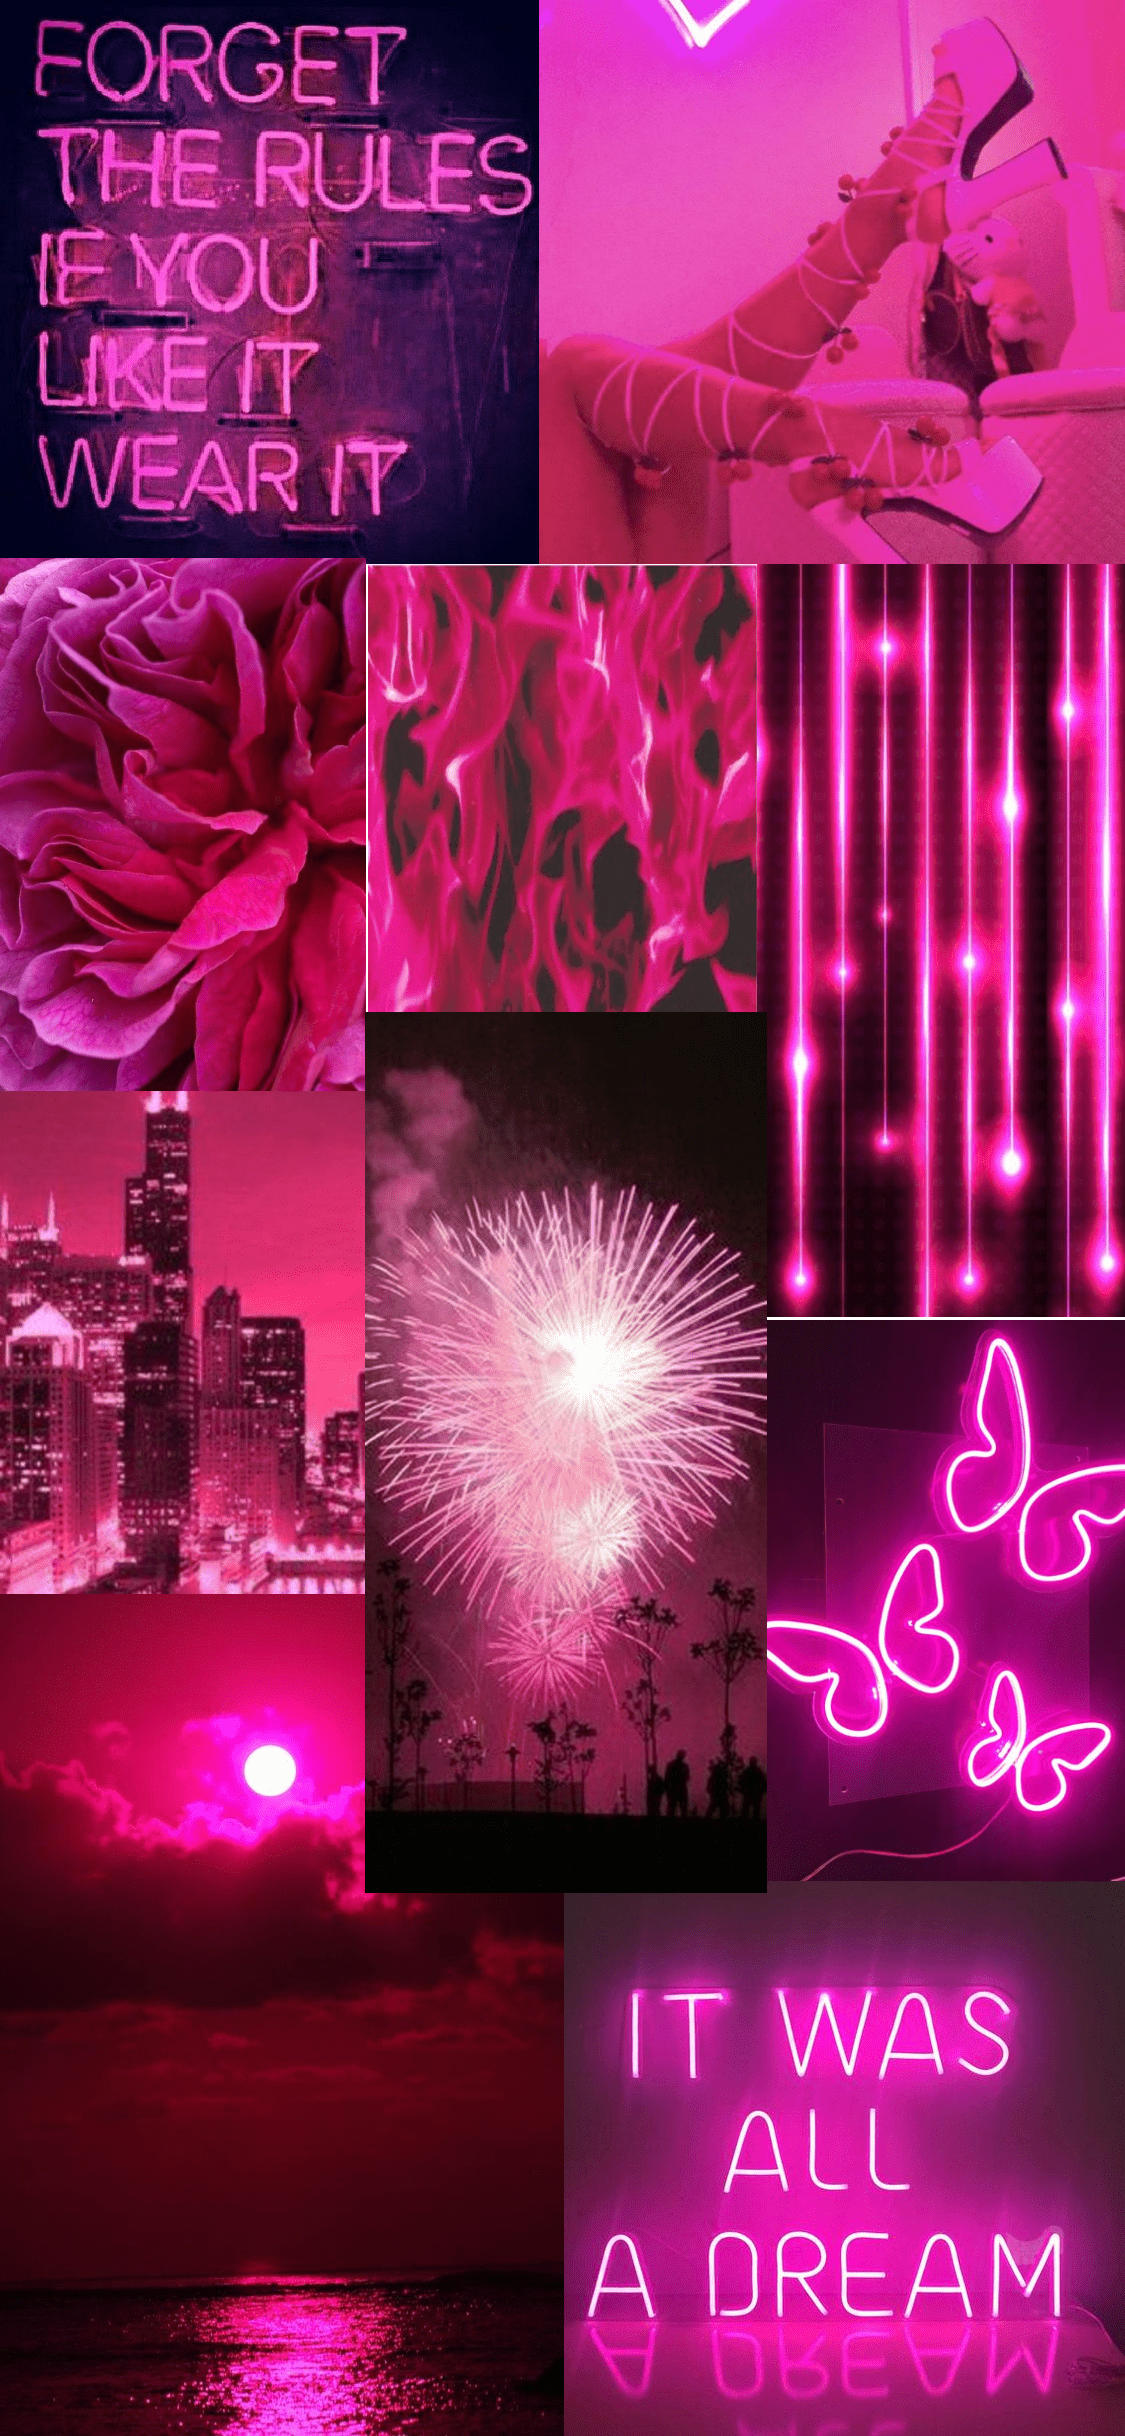 Aesthetic wallpaper for phone or desktop. Pink and purple collage - Neon pink, hot pink